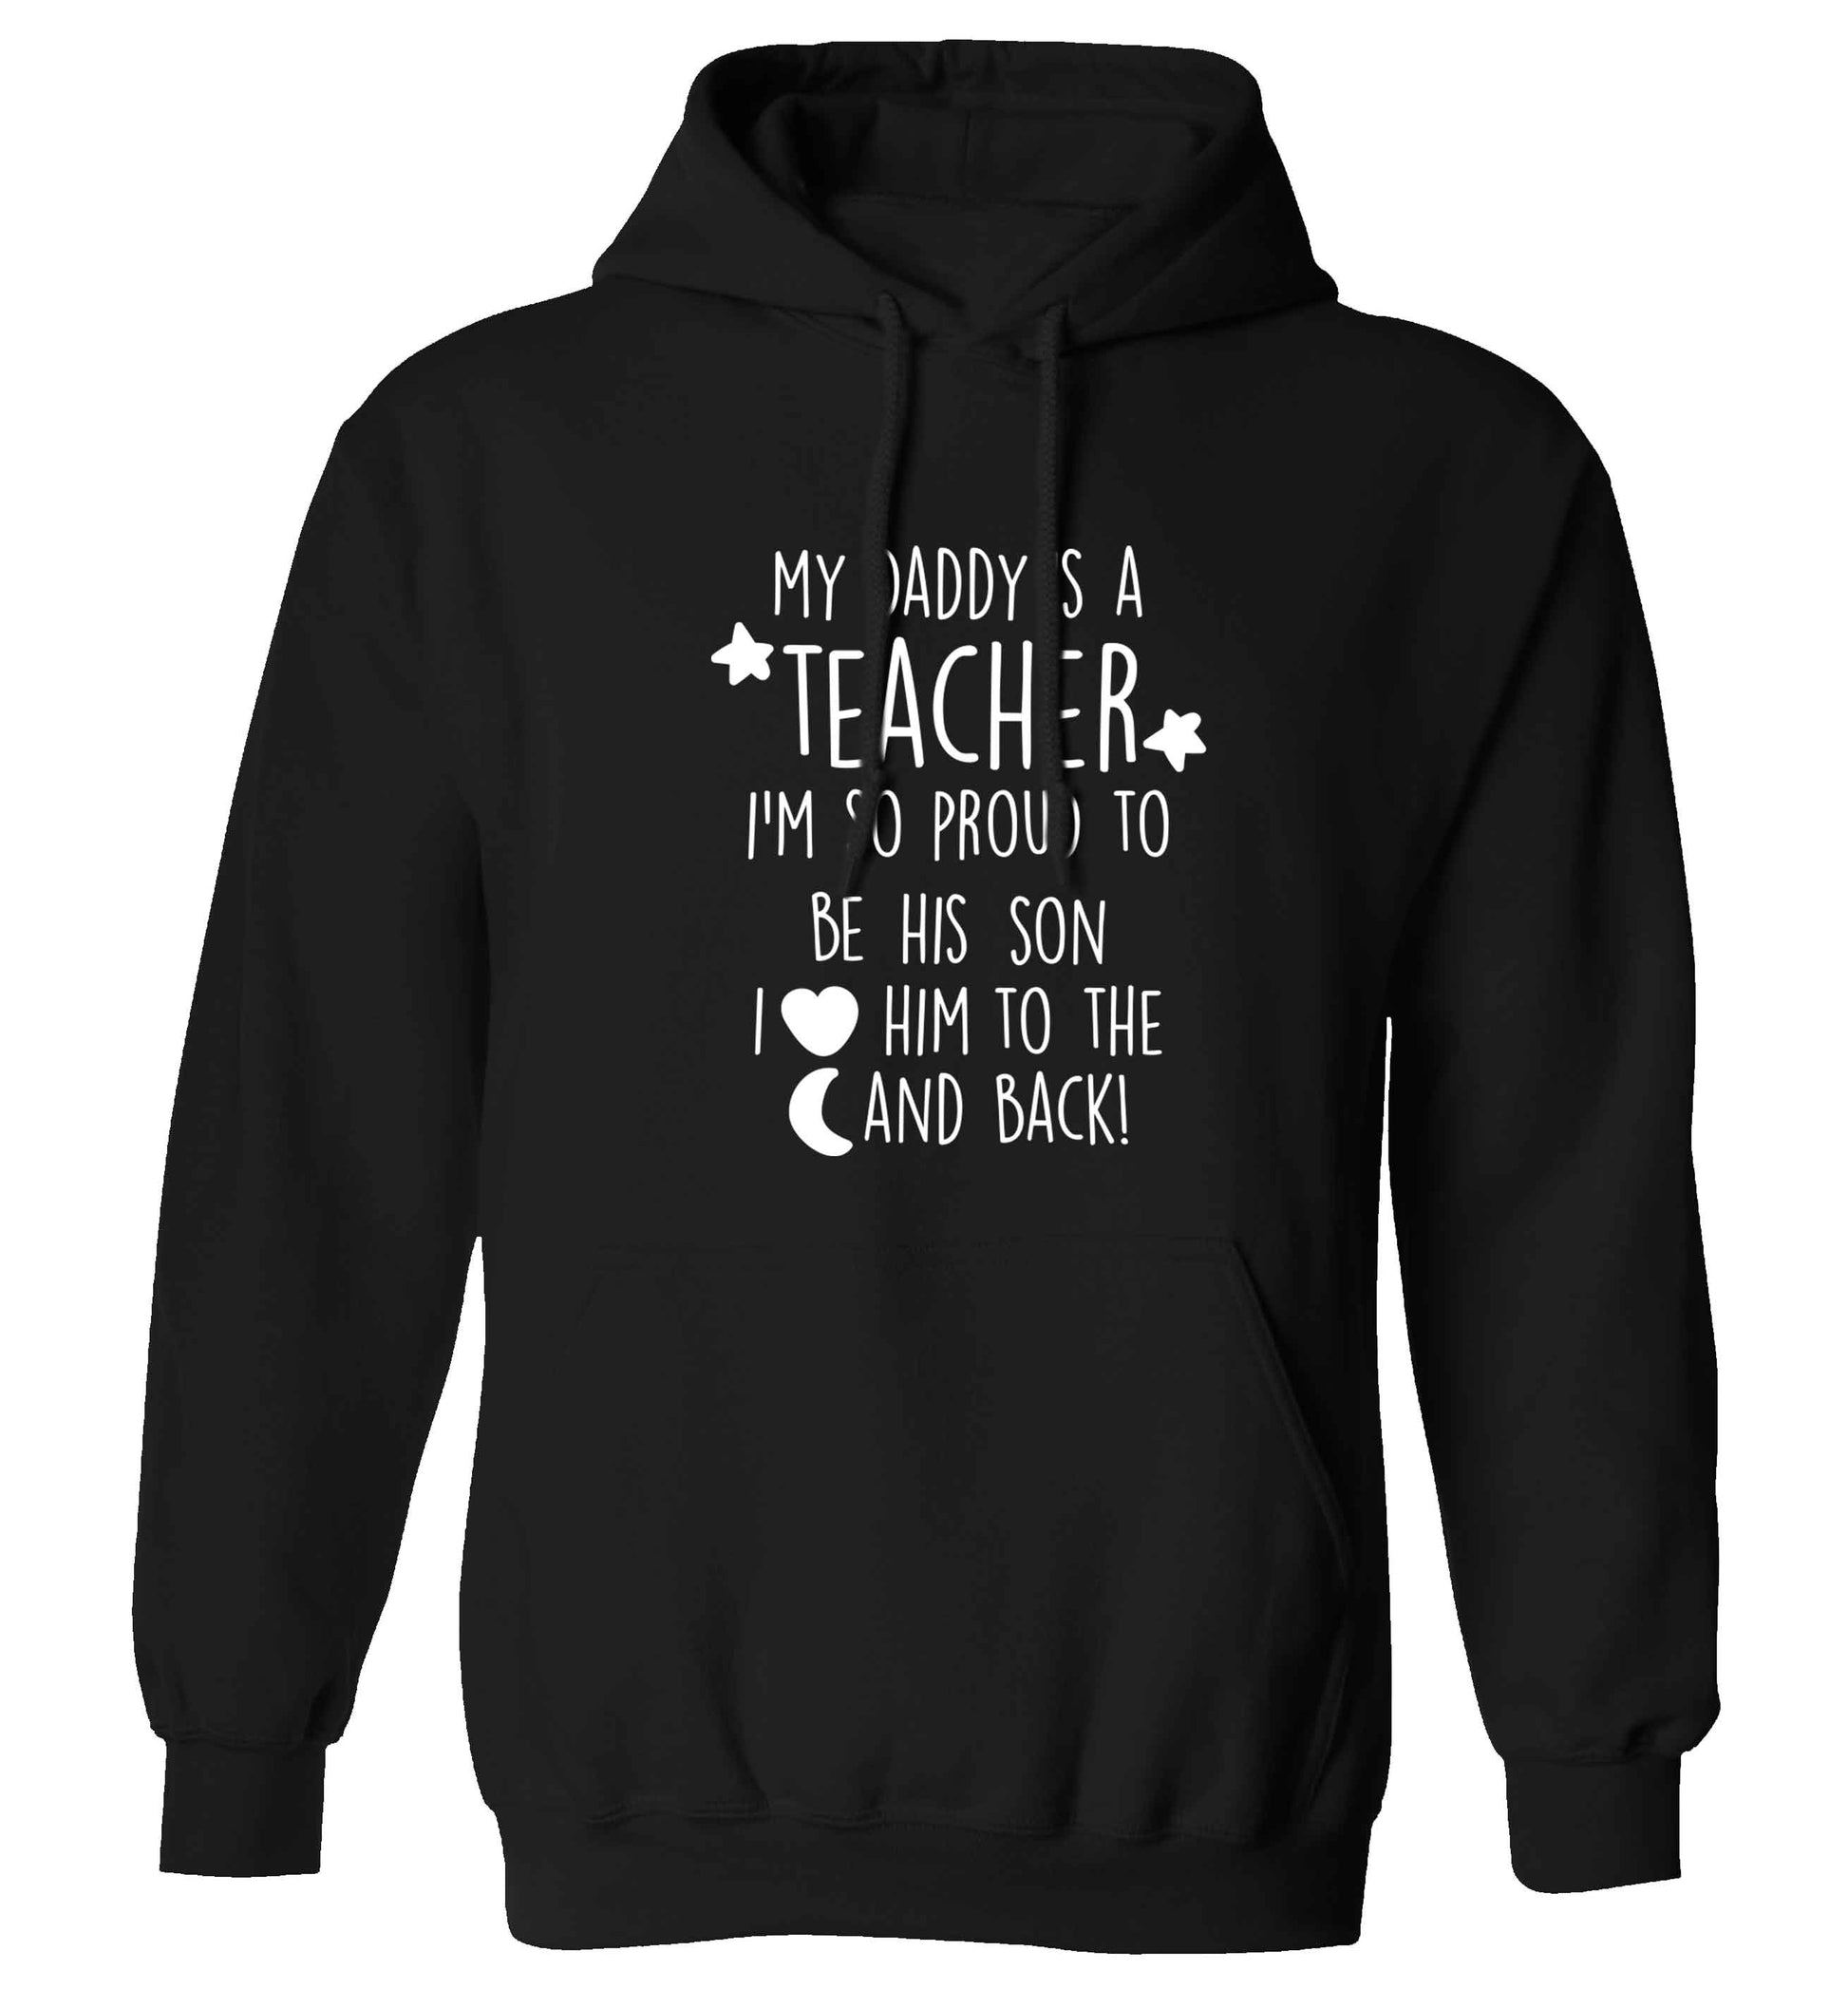 My daddy is a teacher I'm so proud to be his son I love her to the moon and back adults unisex black hoodie 2XL